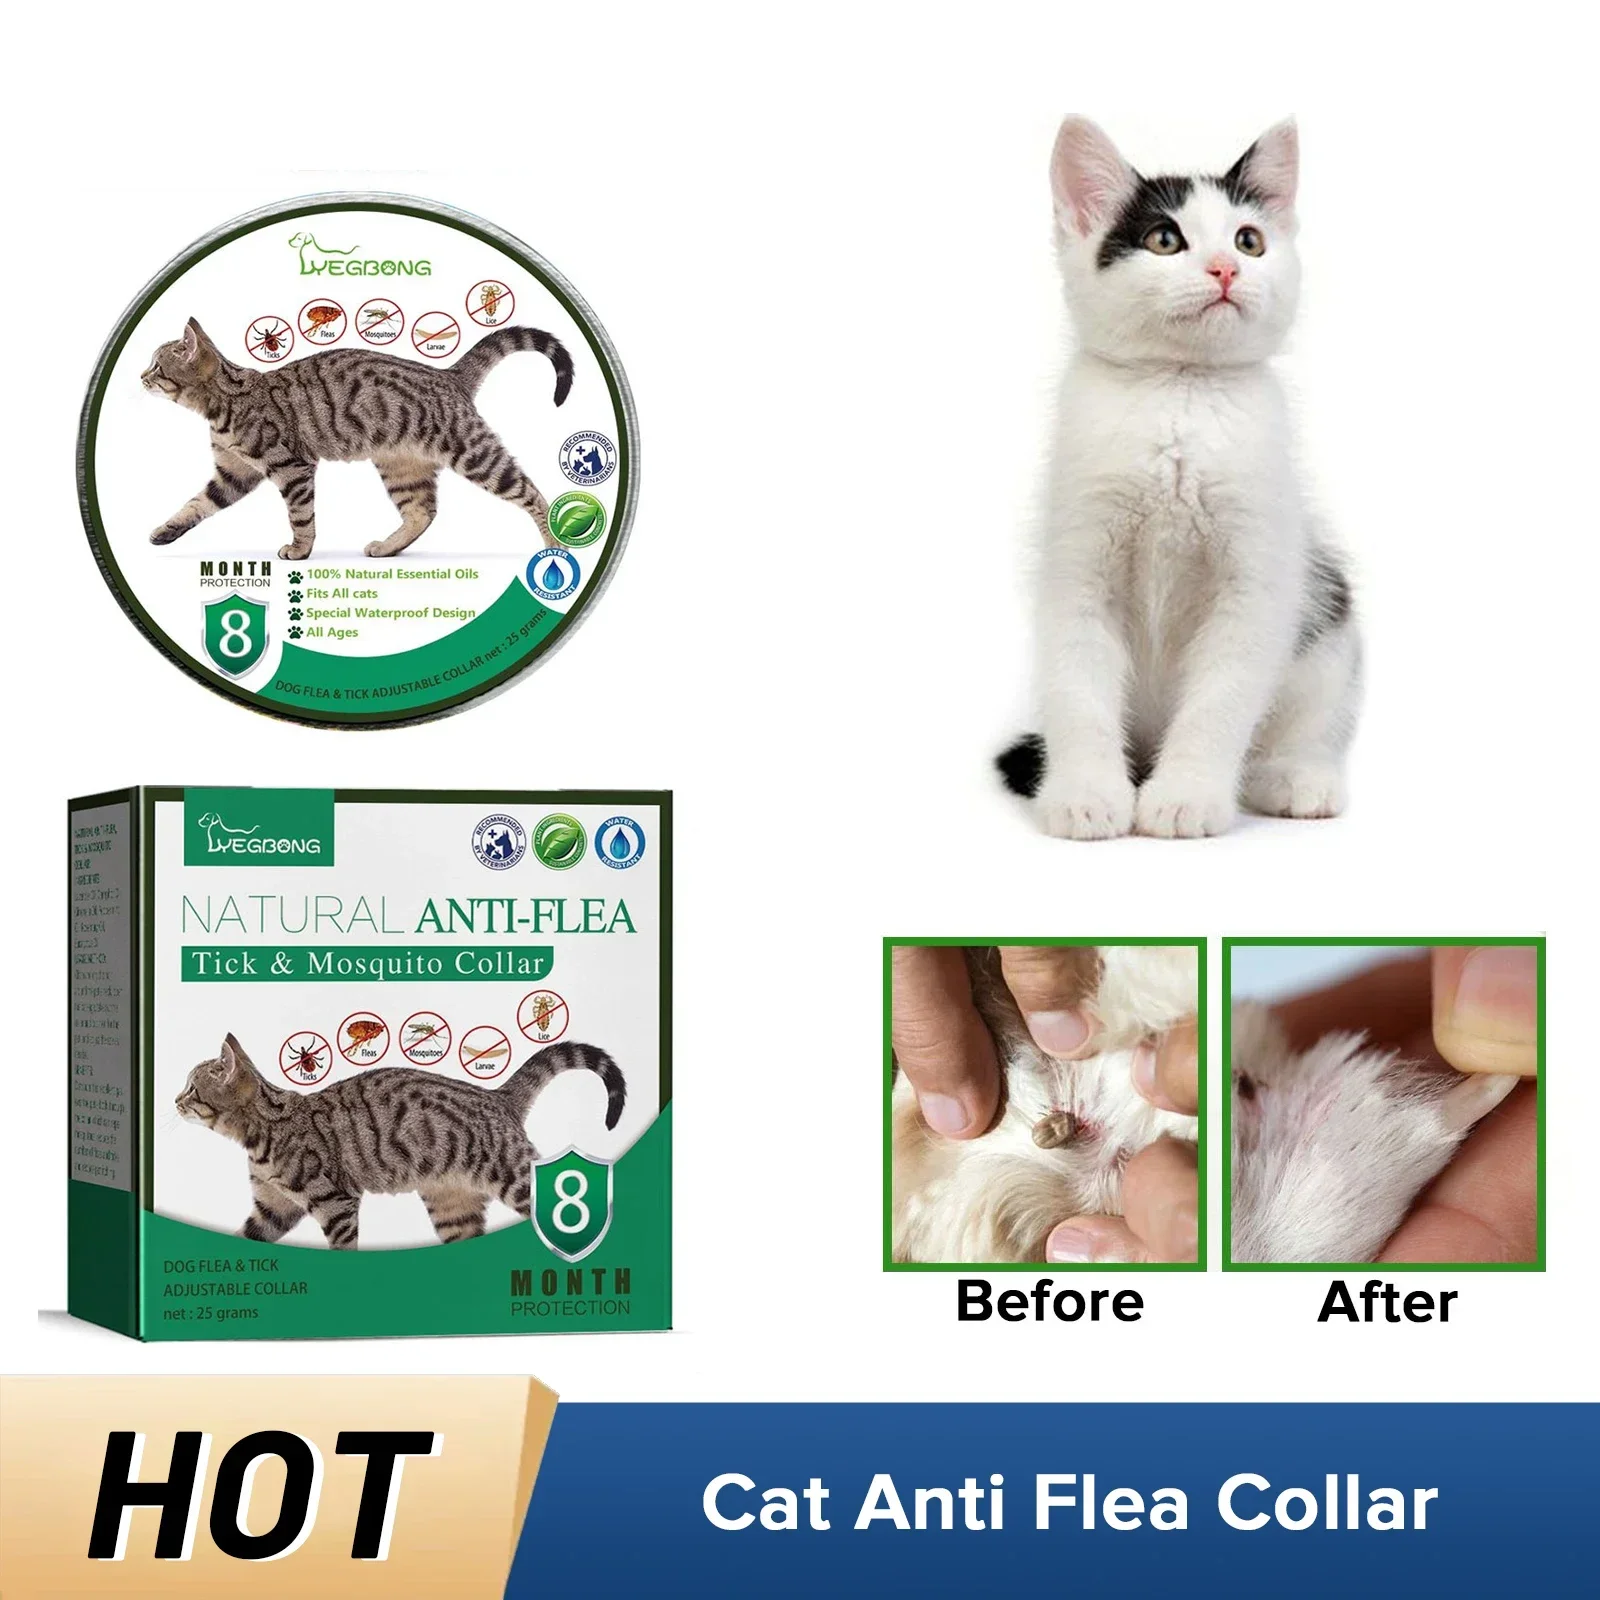 Pets Insect Prevention Collar Anti Flea Tick Itch Relief Mosquito Insect Repellent Pest Control Adjustable Cat Deworming Collar